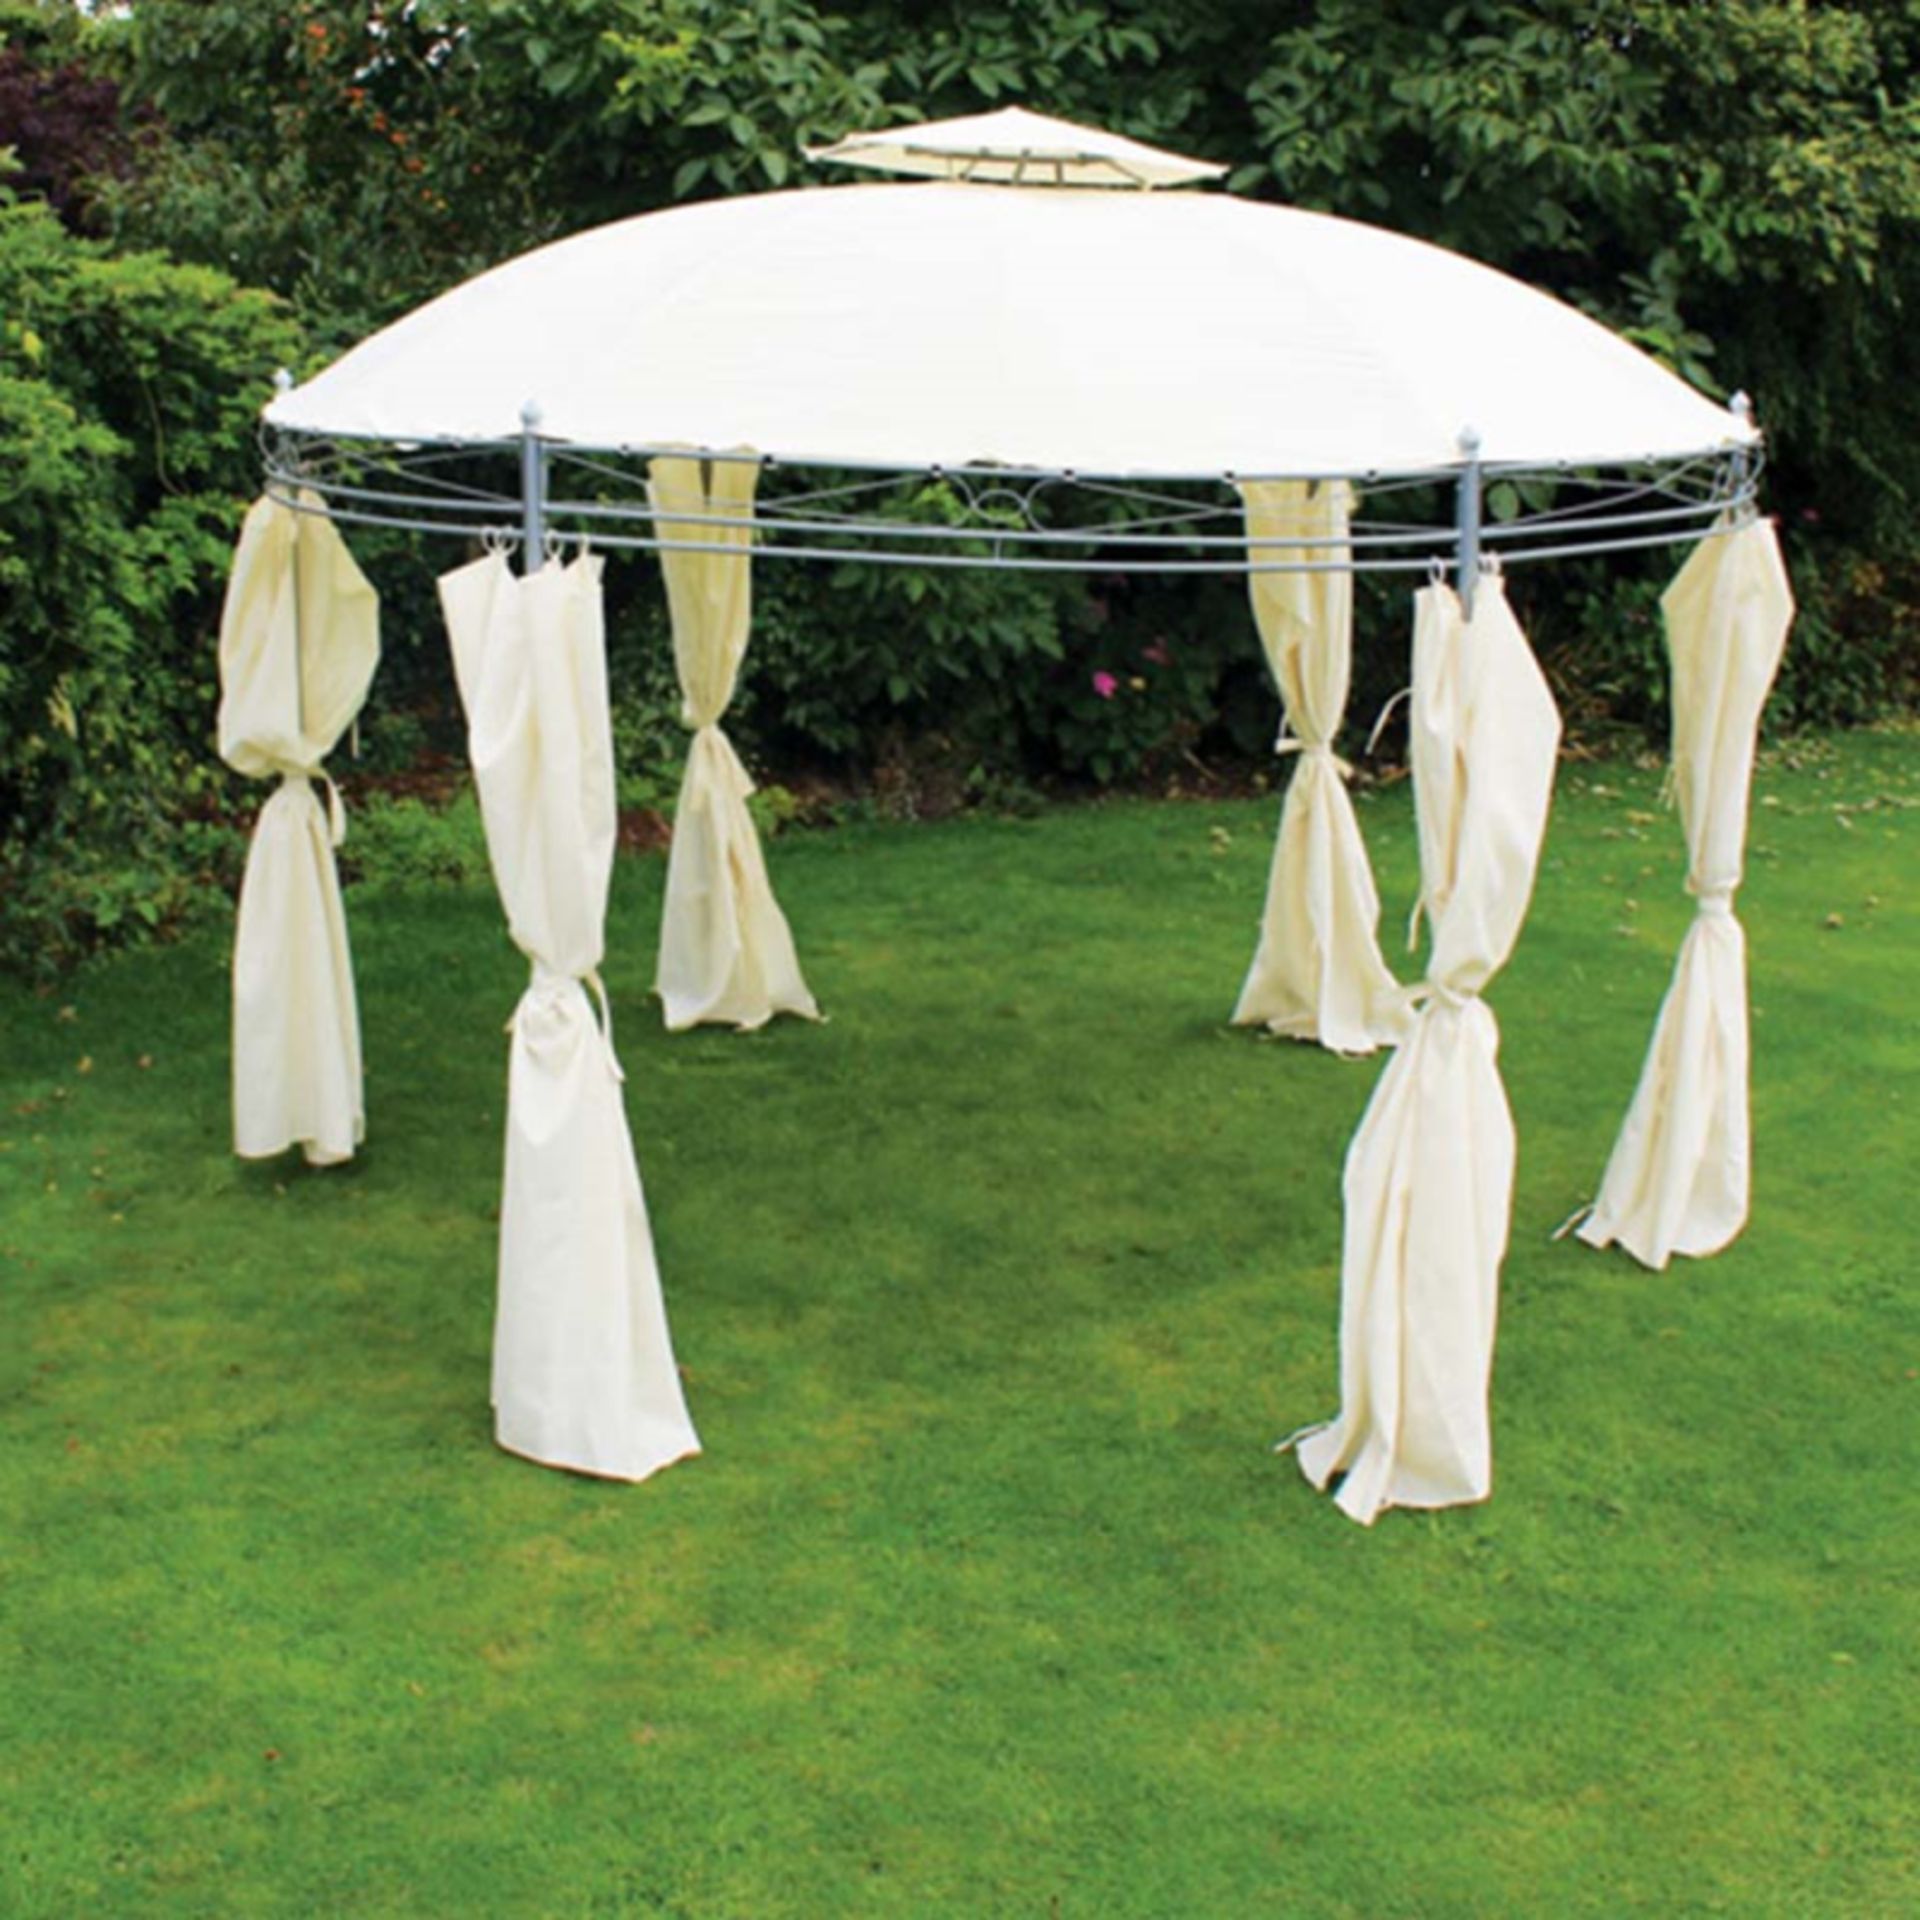 V Brand New 3.5m Round Party Tent Gazebo With Side Curtains - Cream